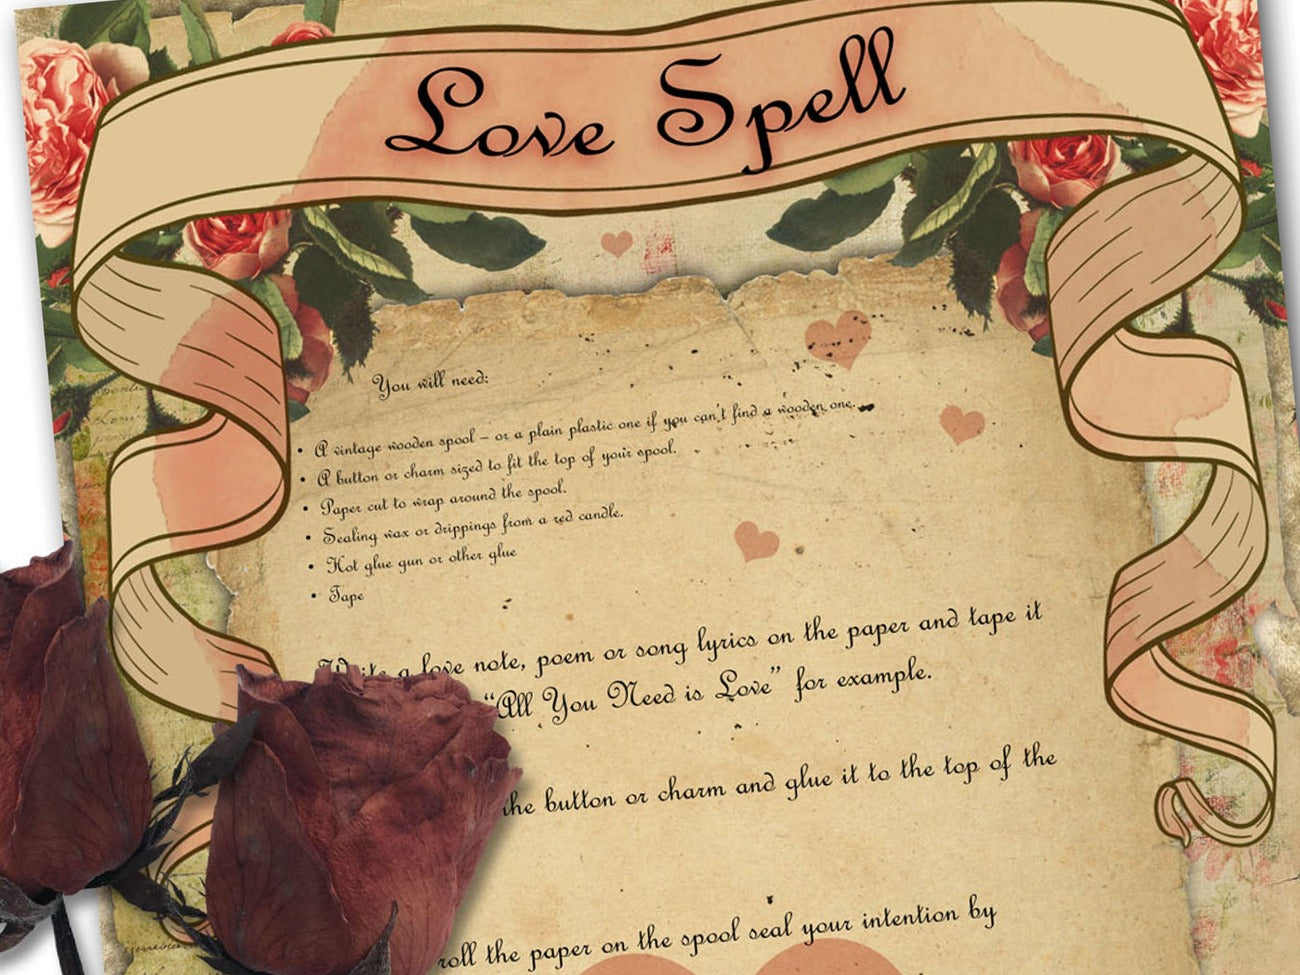 LOVE SPELL, Unique Wicca Witchcraft Spell to Draw a Lover, Witch Love Charm, Love Potion Recipe, Find a Lover and Arouse Love, Valentine - Morgana Magick Spell